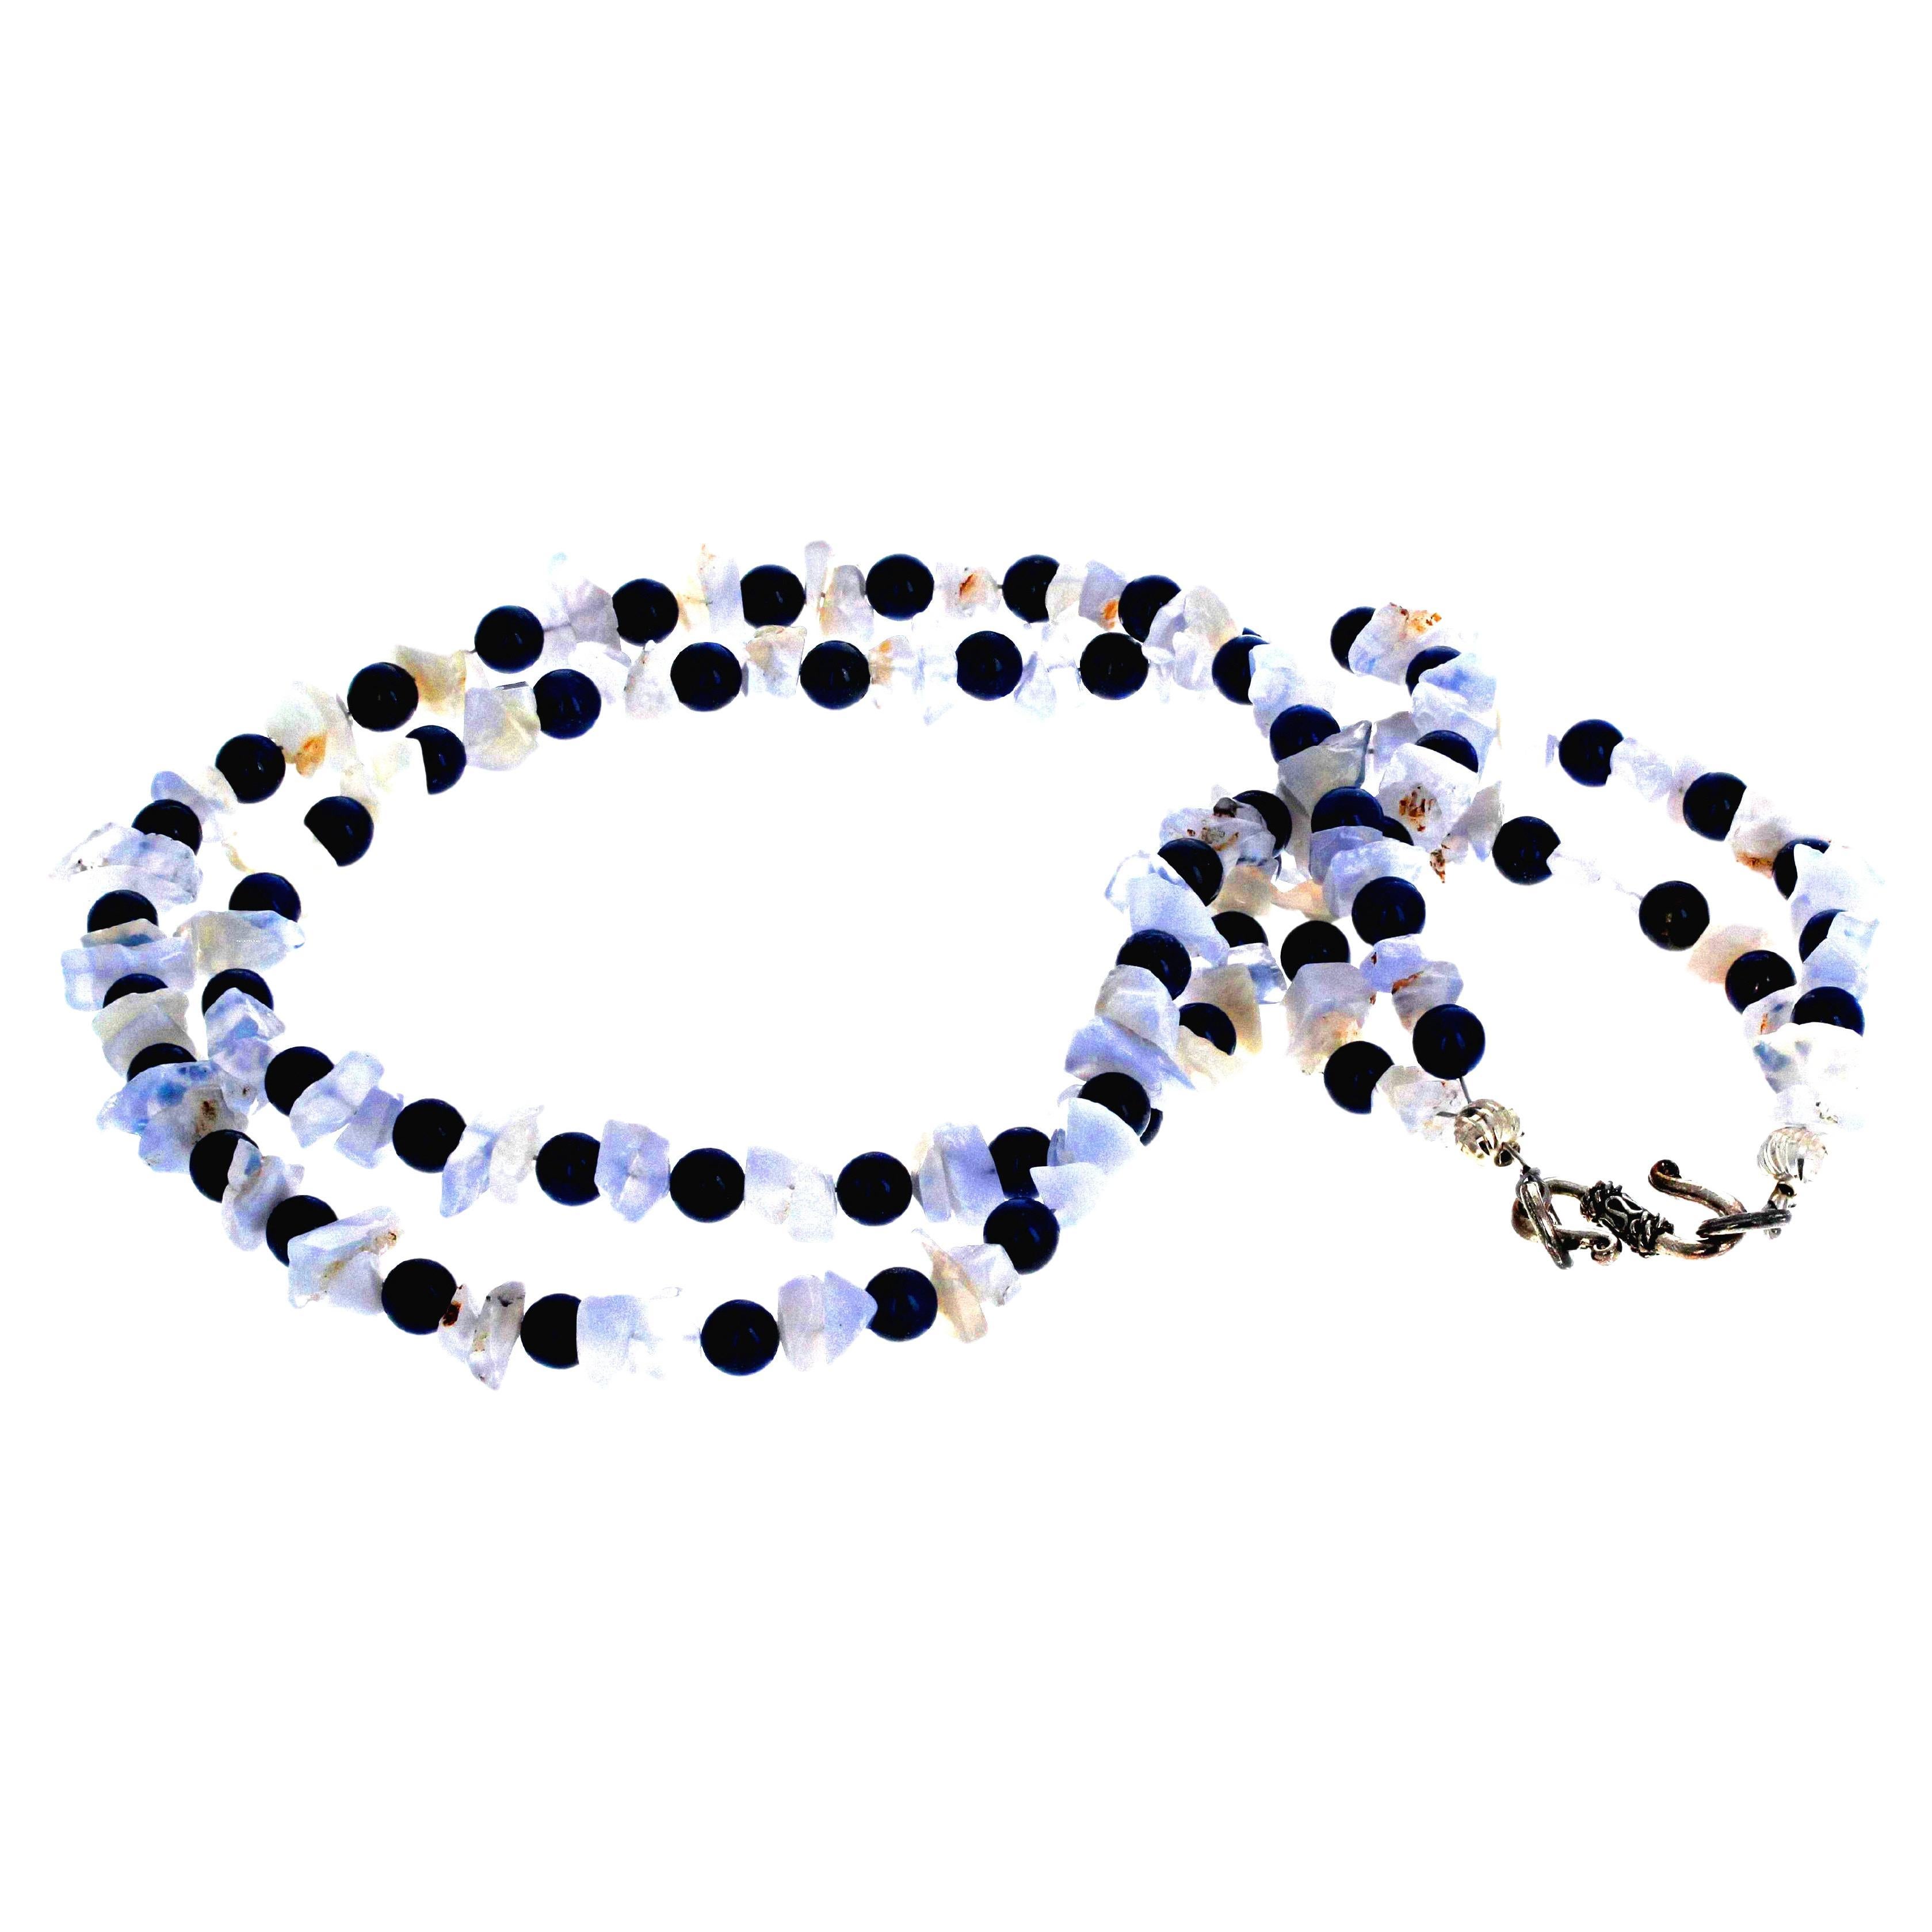 This lovely natural blue Chalcedony enhances the highly polished natural blue Lapis Lazuli rondels.  The Lapis are approximately 6 1/2mm and the Chalcedony chips are fascinating partially translucent gems.  The clasp on this lovely double strand